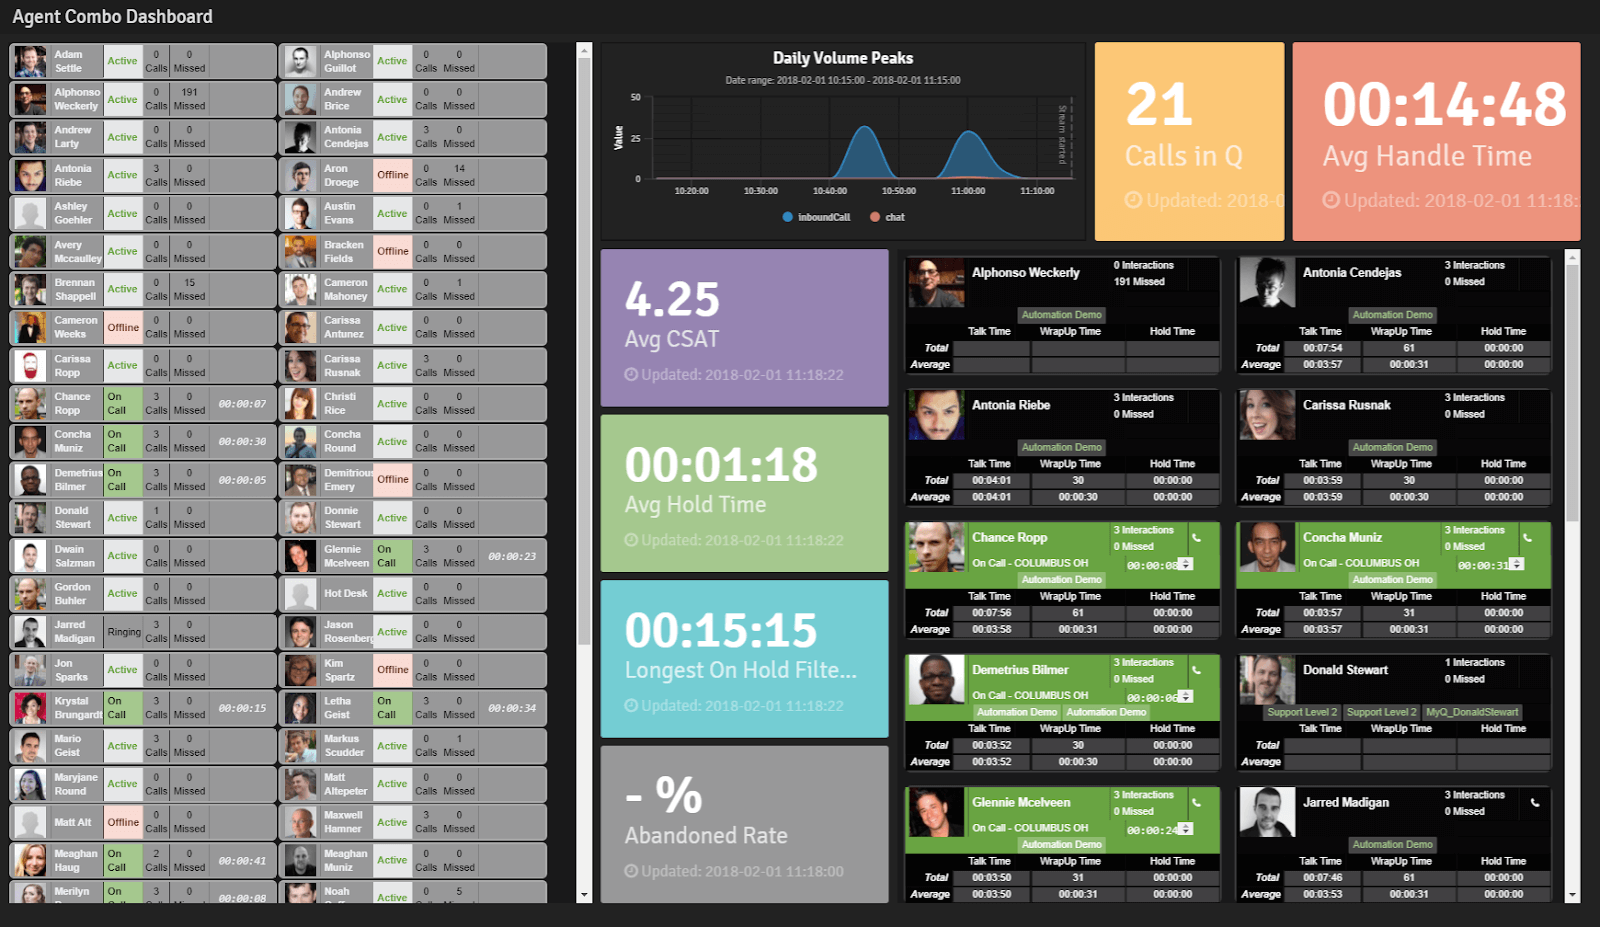 Agent-specific dashboards give your team insight into their progress